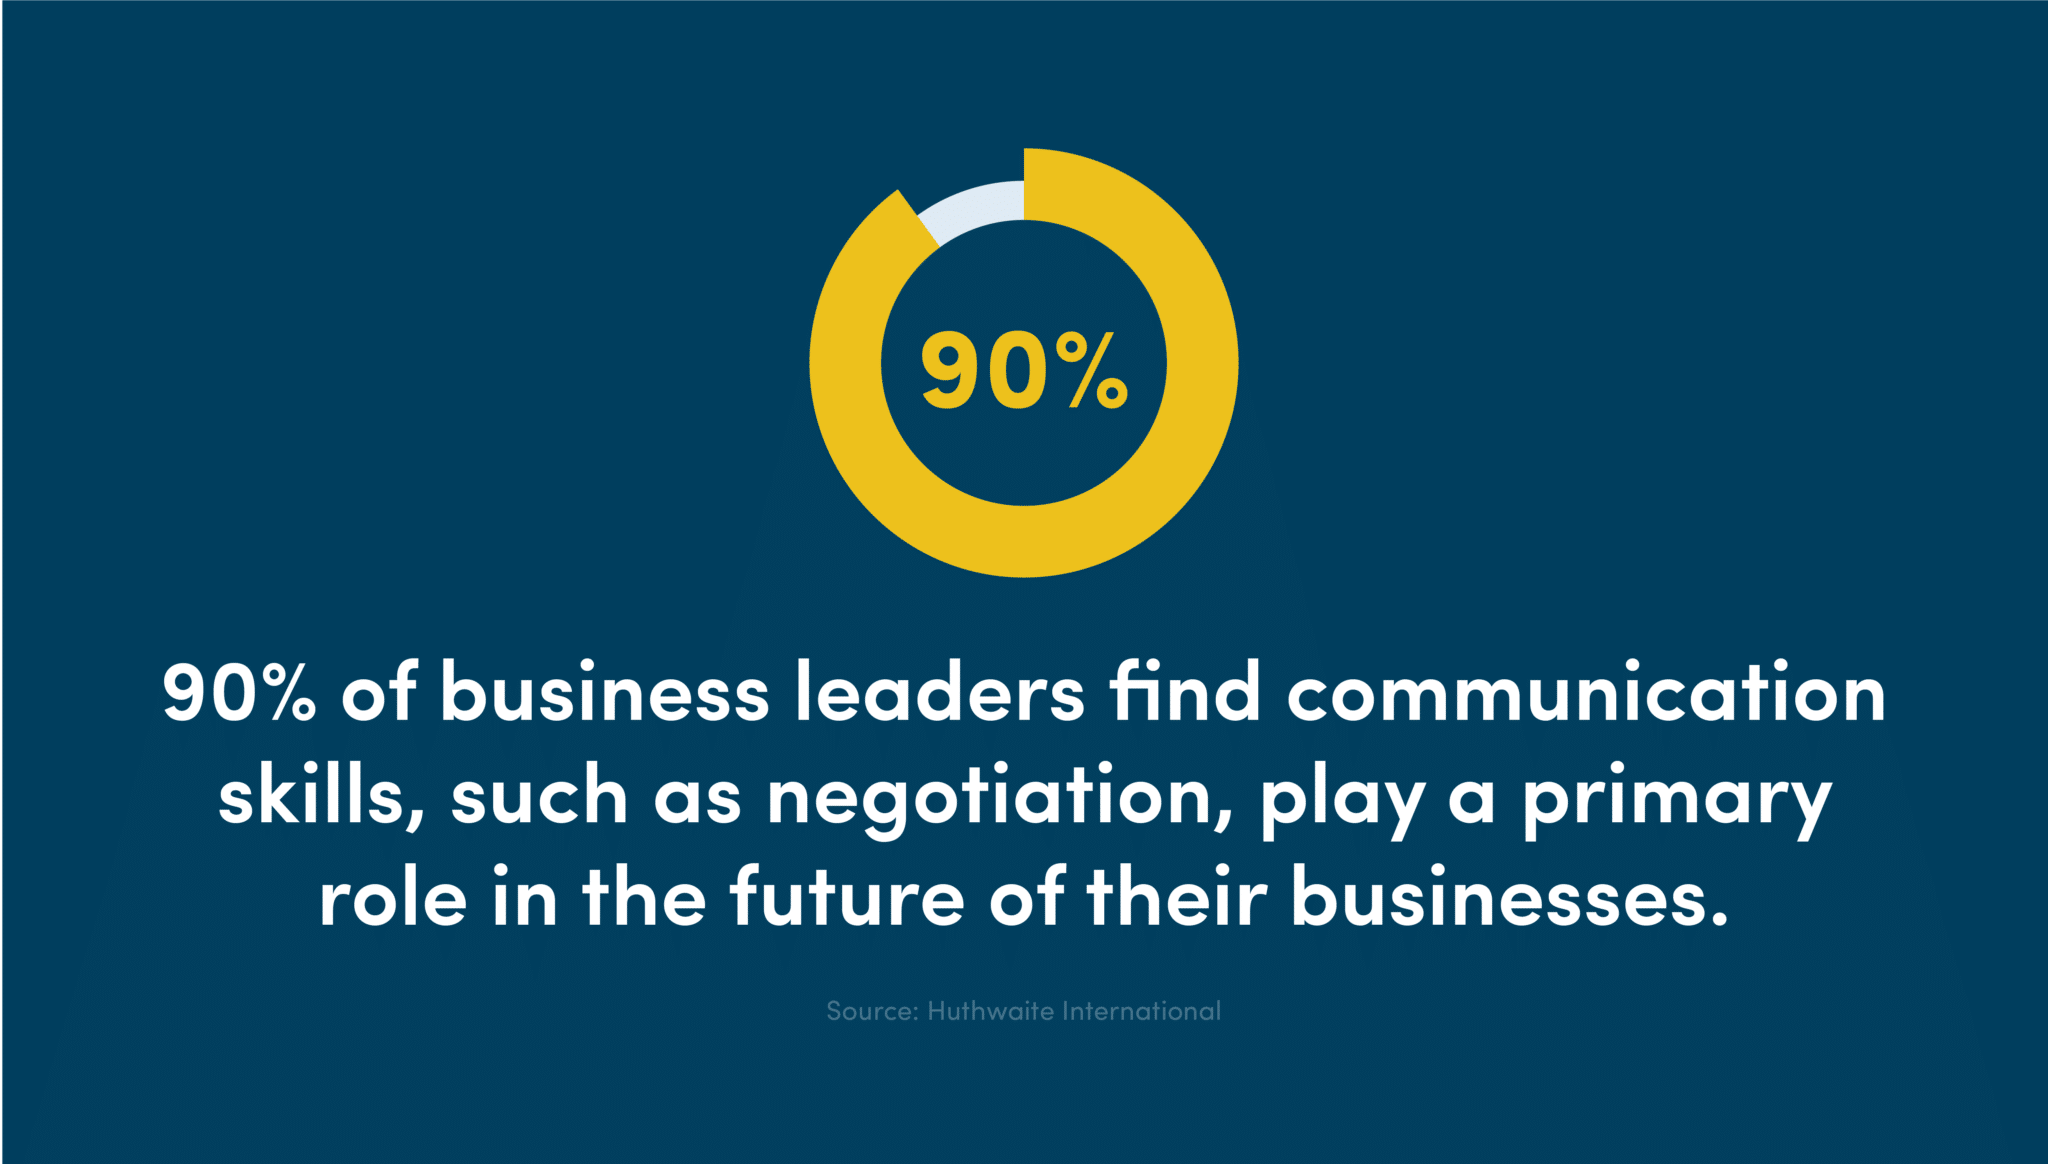 90% of business leaders find communication skills, such as negotiation, play a primary role in the future of their businesses.